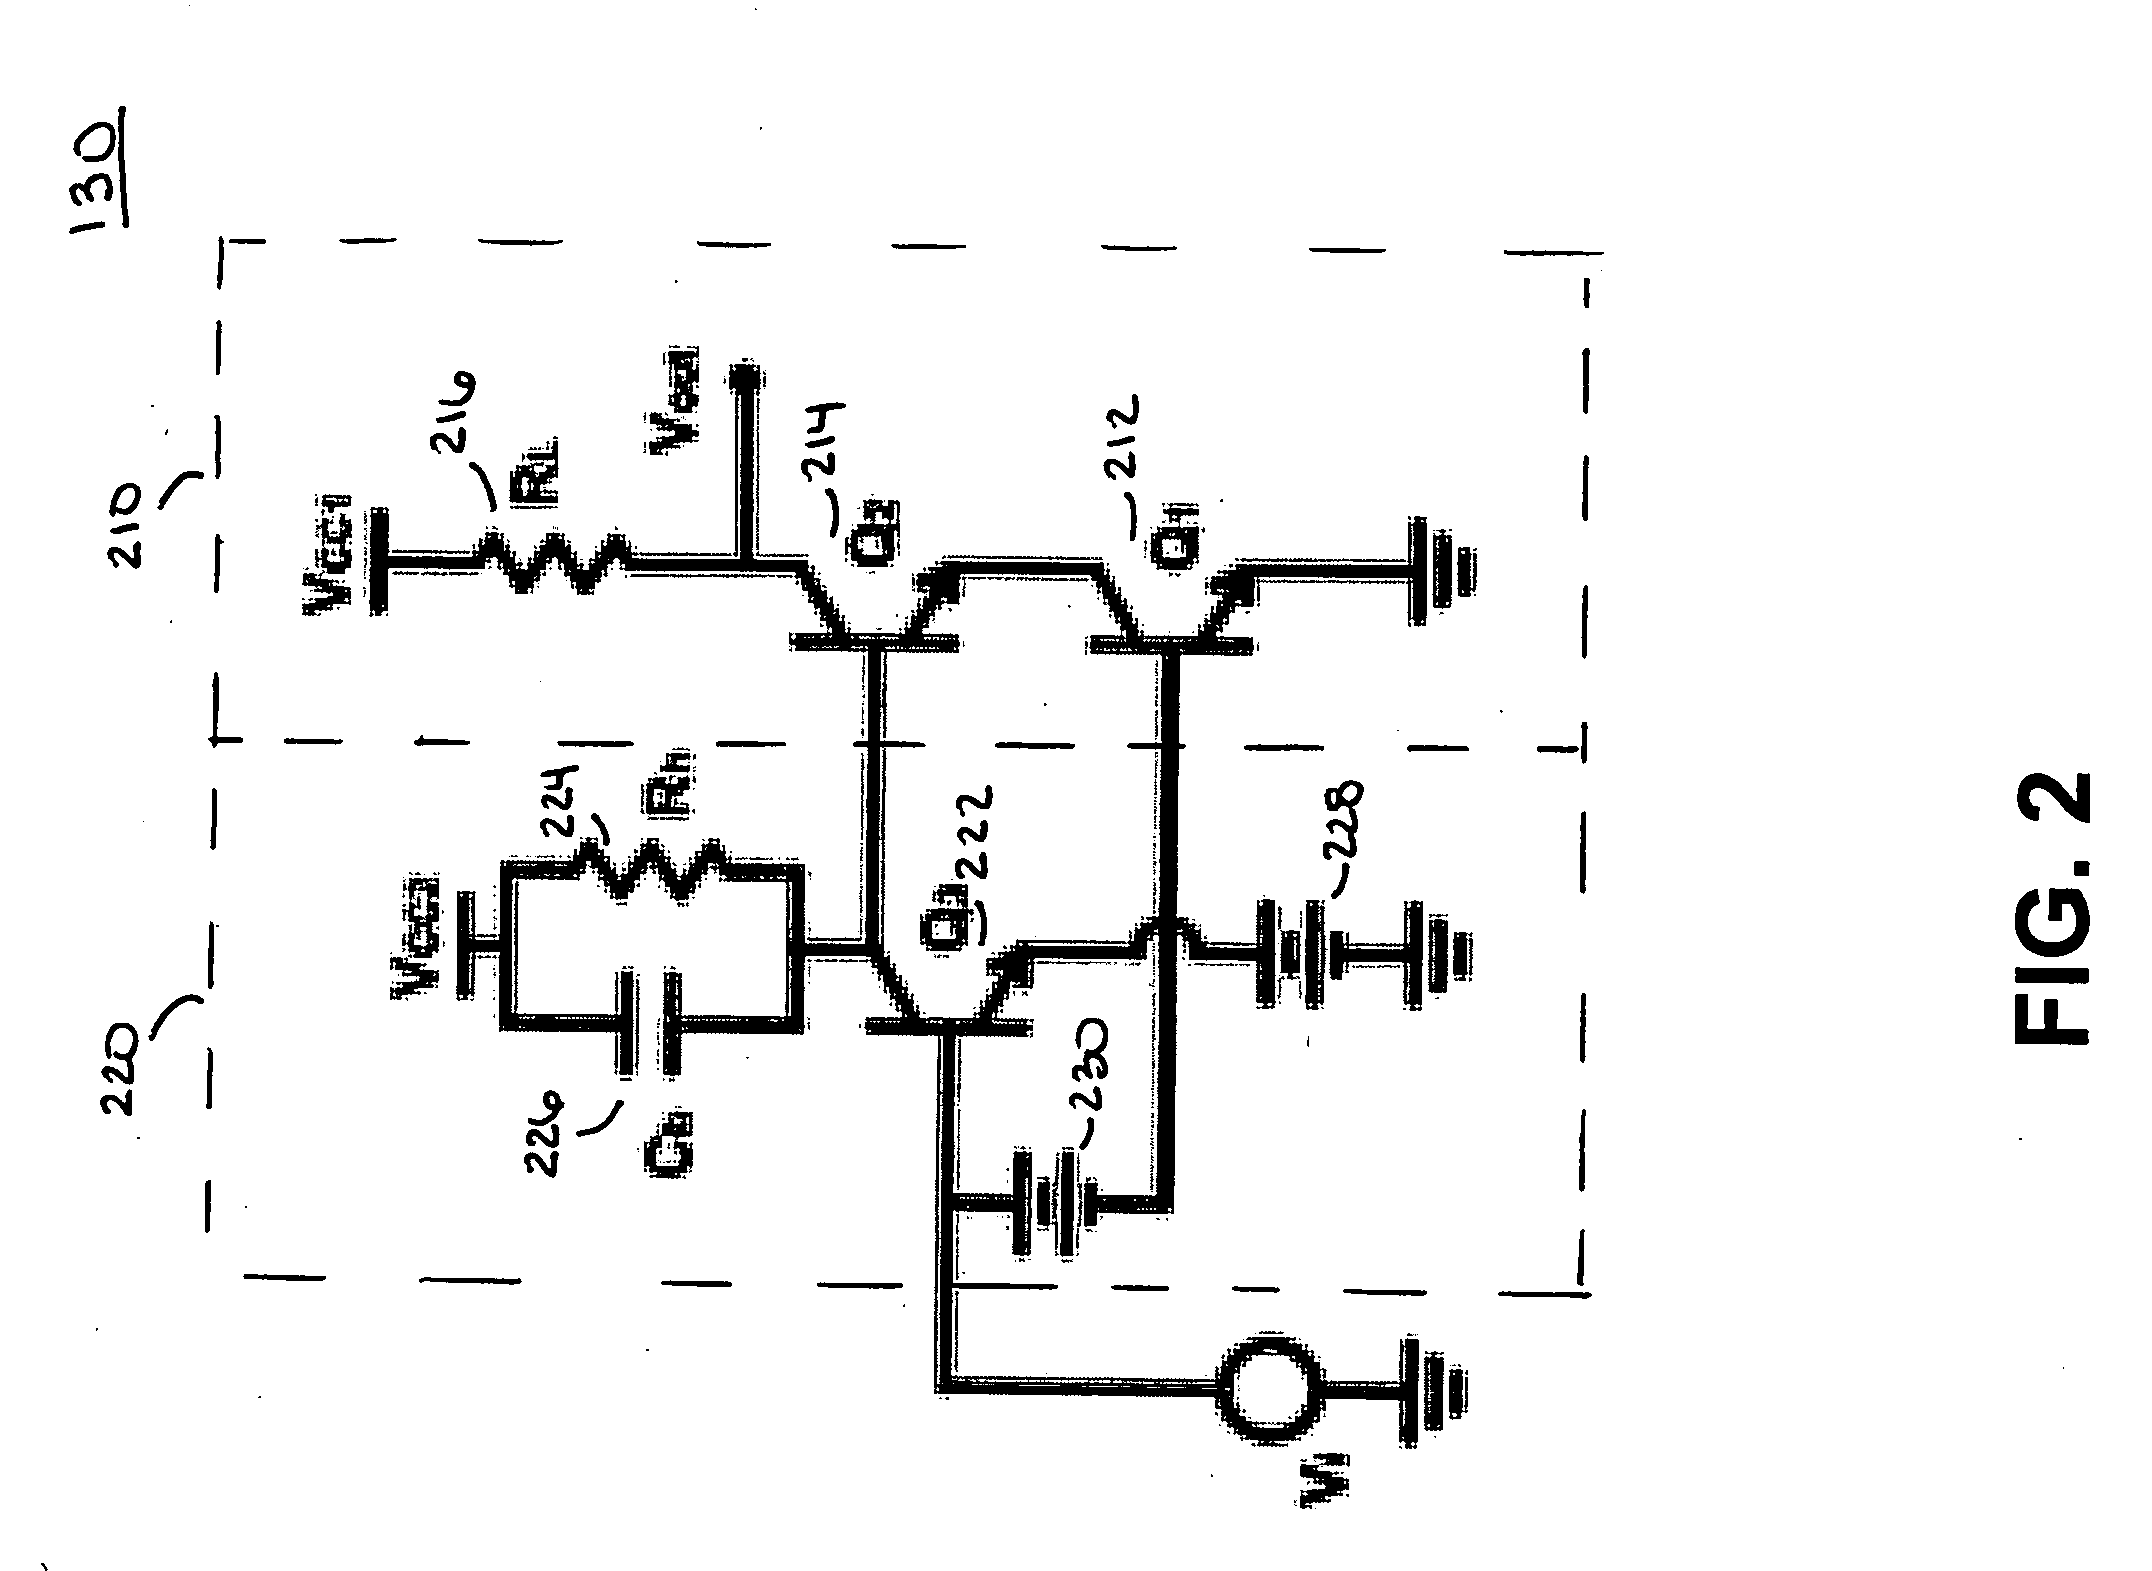 Integrated circuit with breakdown voltage multiplier